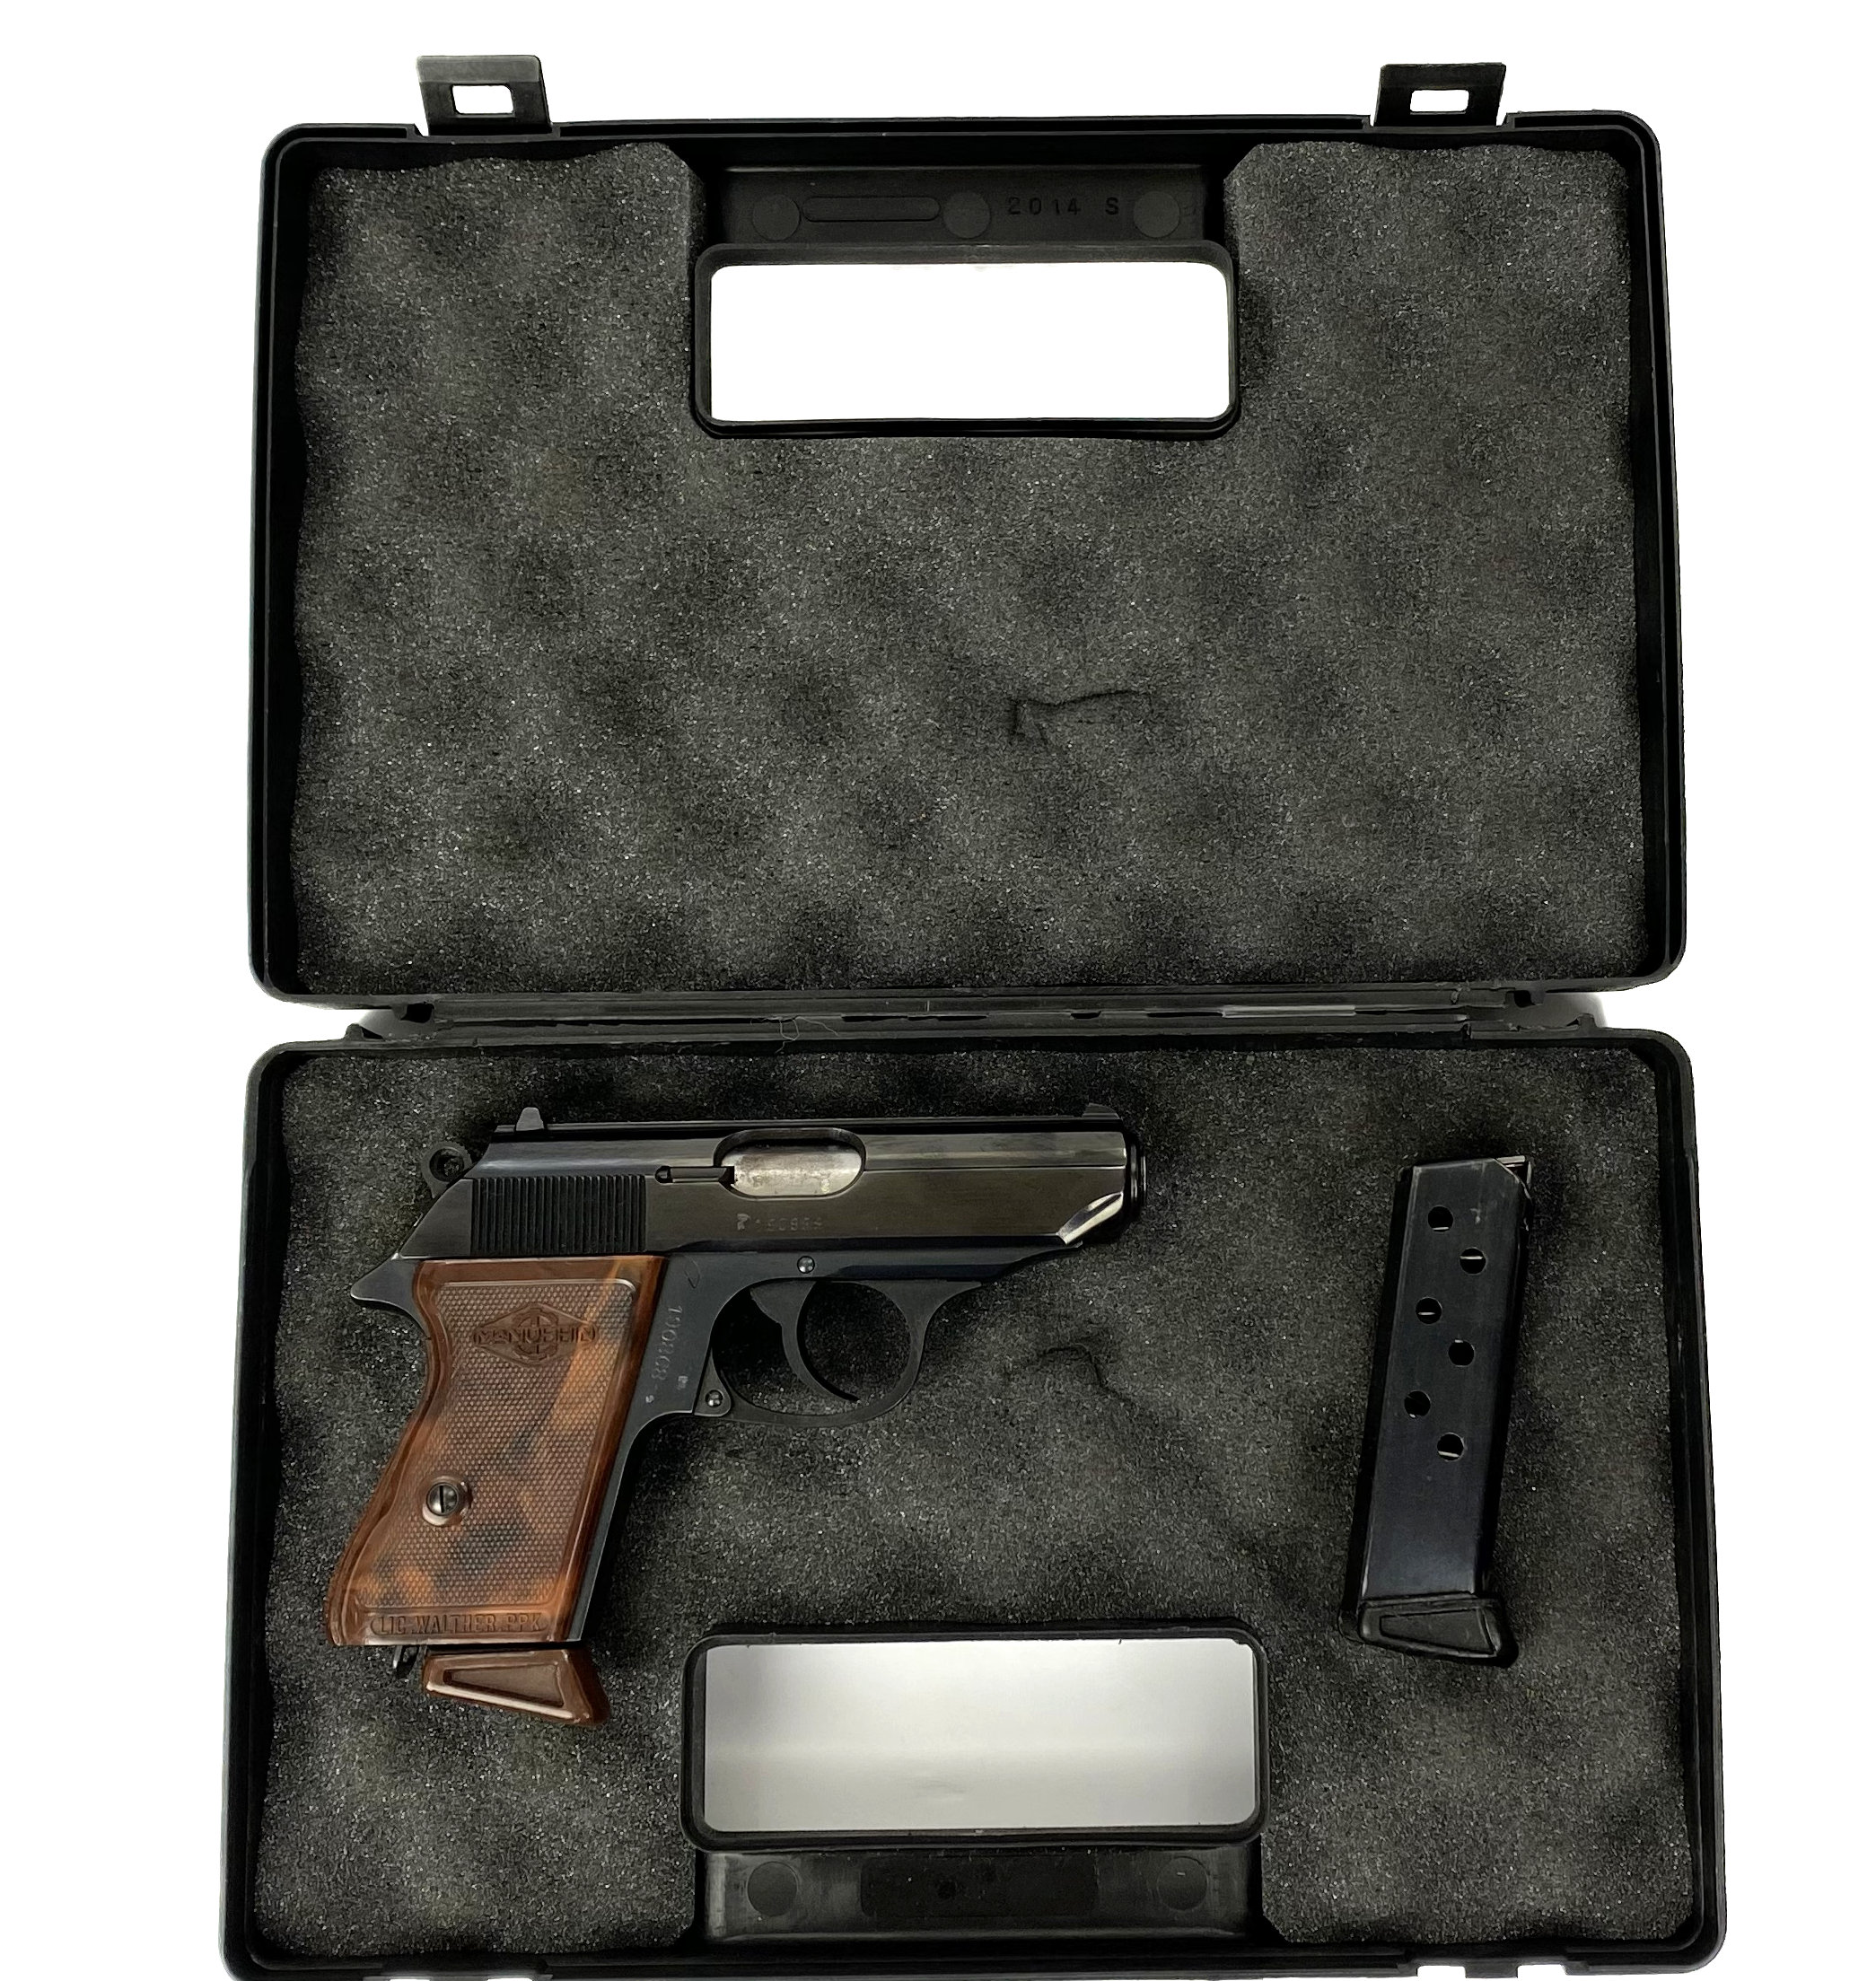 PISTOLET WALTHER MANURHIN PPK calibre 7,65 BROWNING 32 ACP